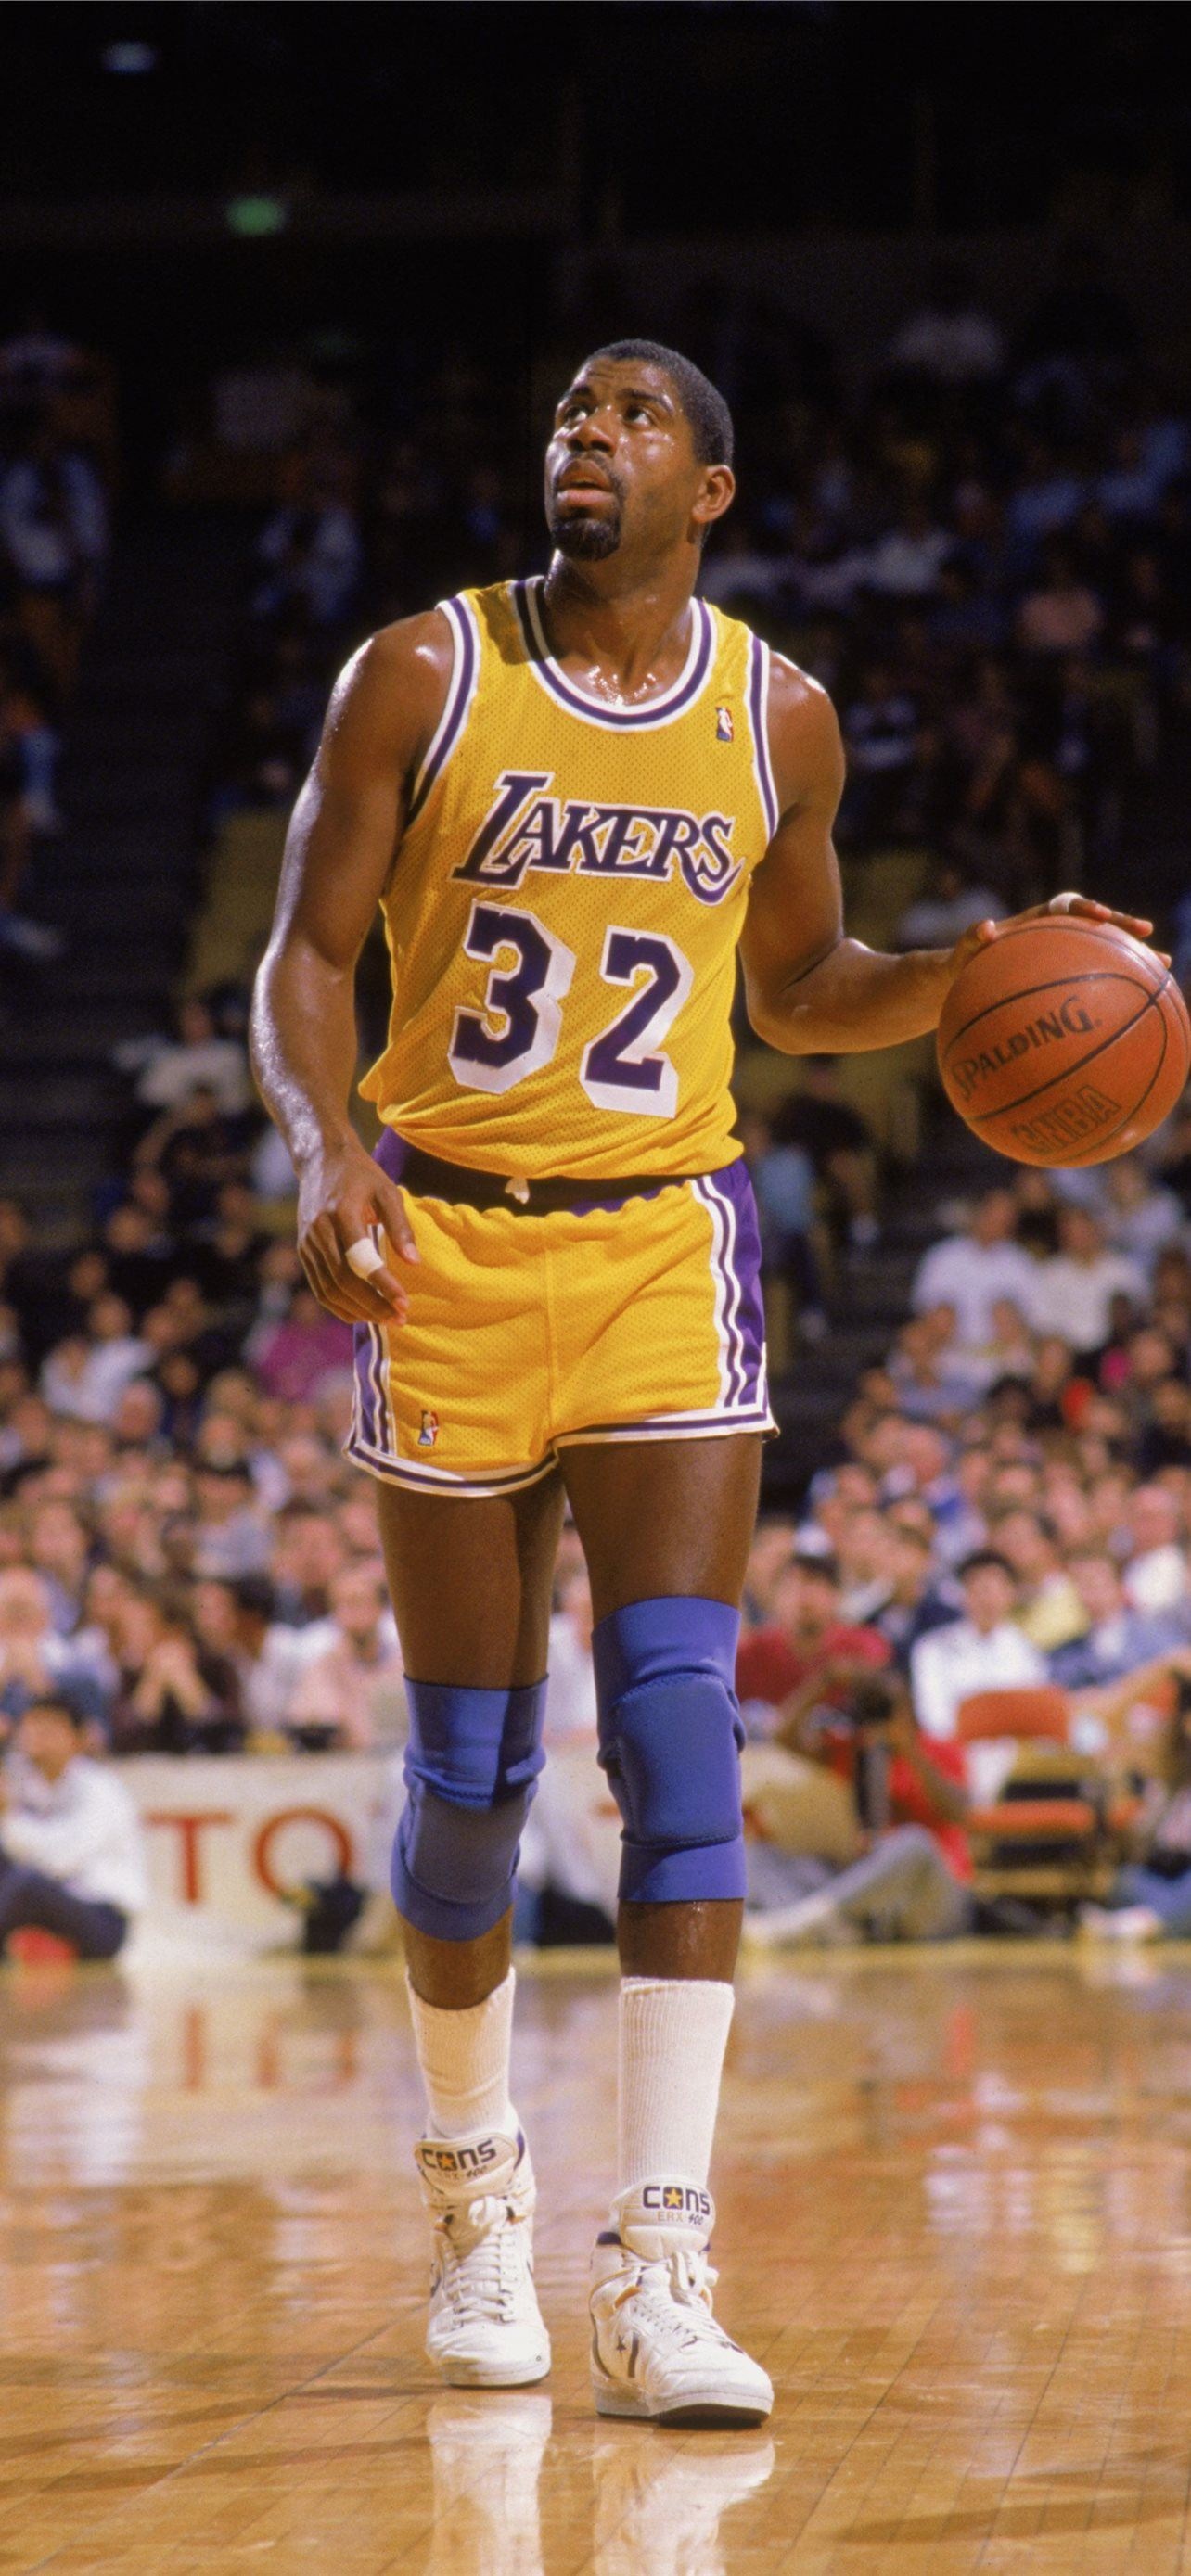 Magic Johnson, Sports, iPhone wallpapers, Free download, 1290x2780 HD Handy